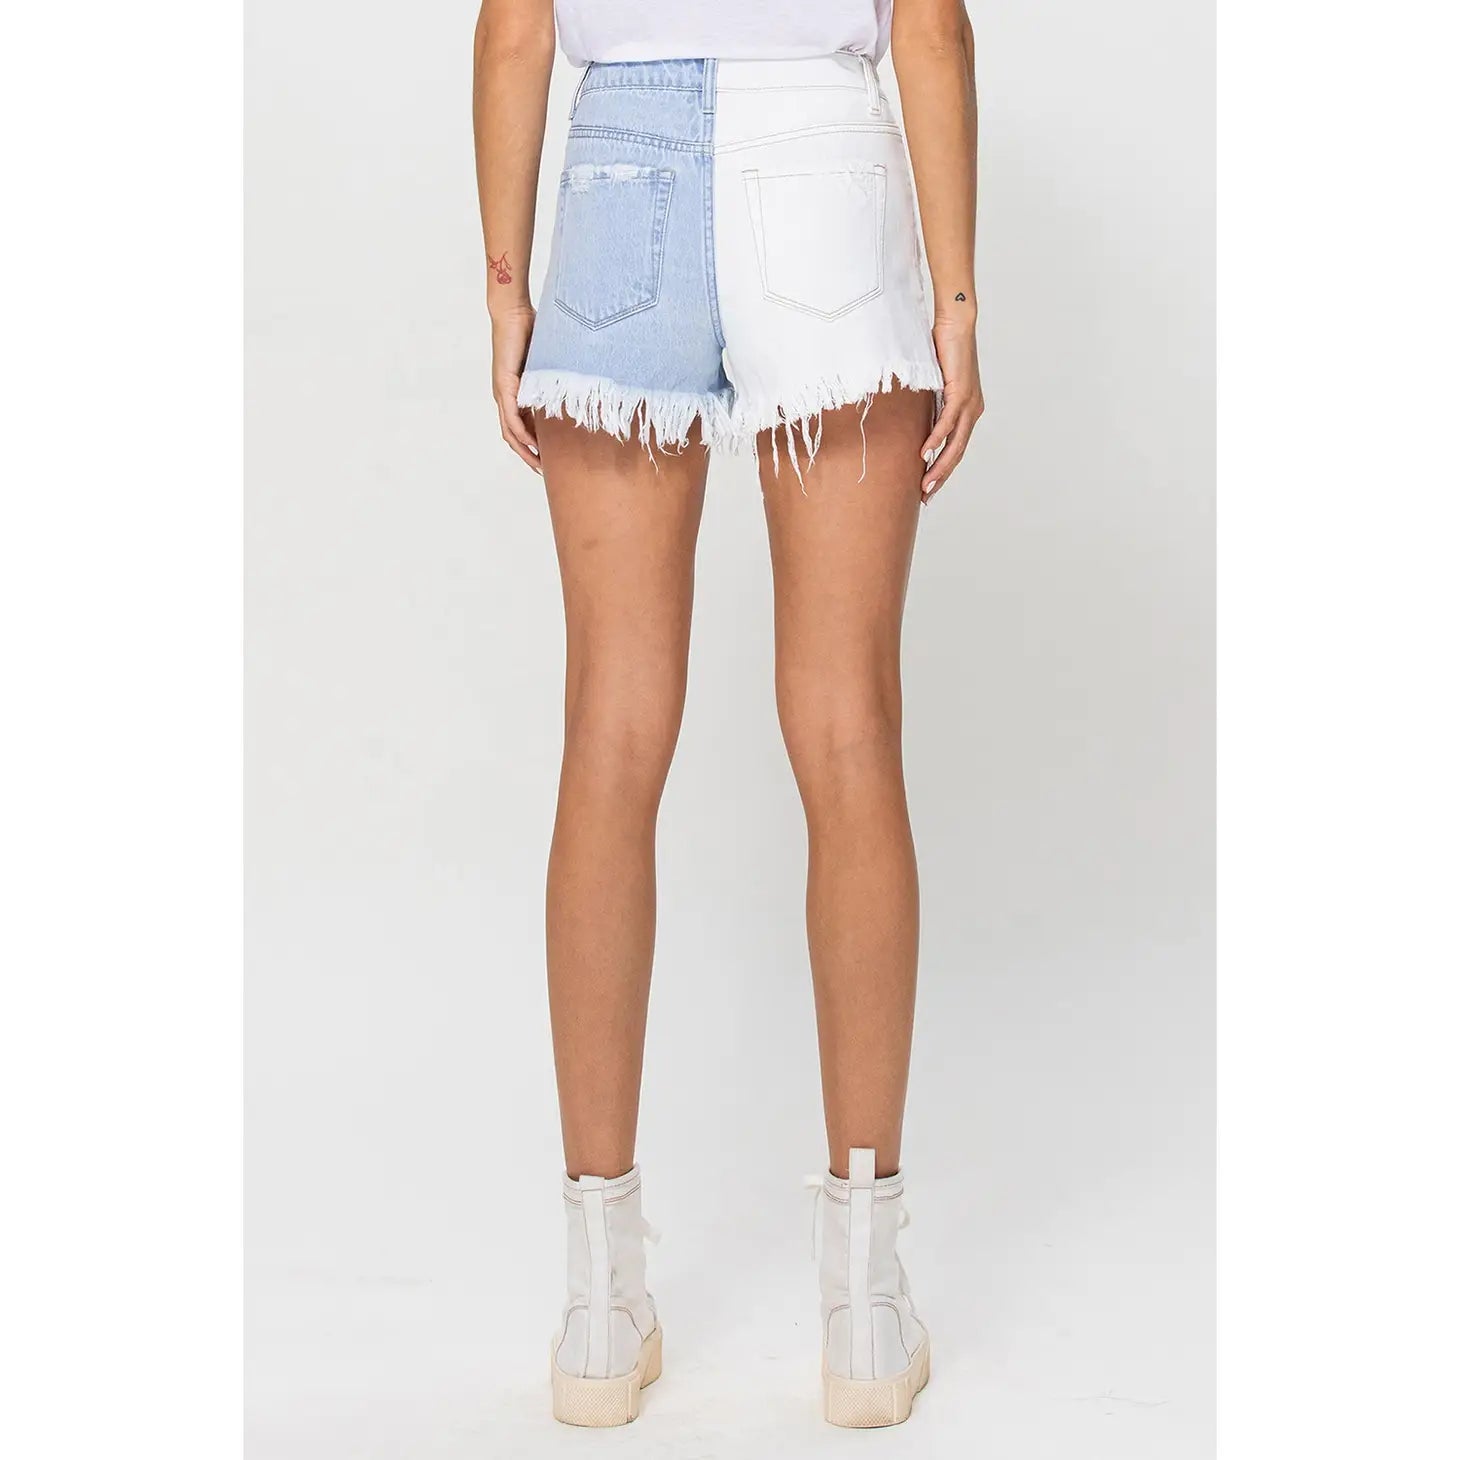 Half and Half Jean Shorts - ONFEMME By Lindsey's Kloset